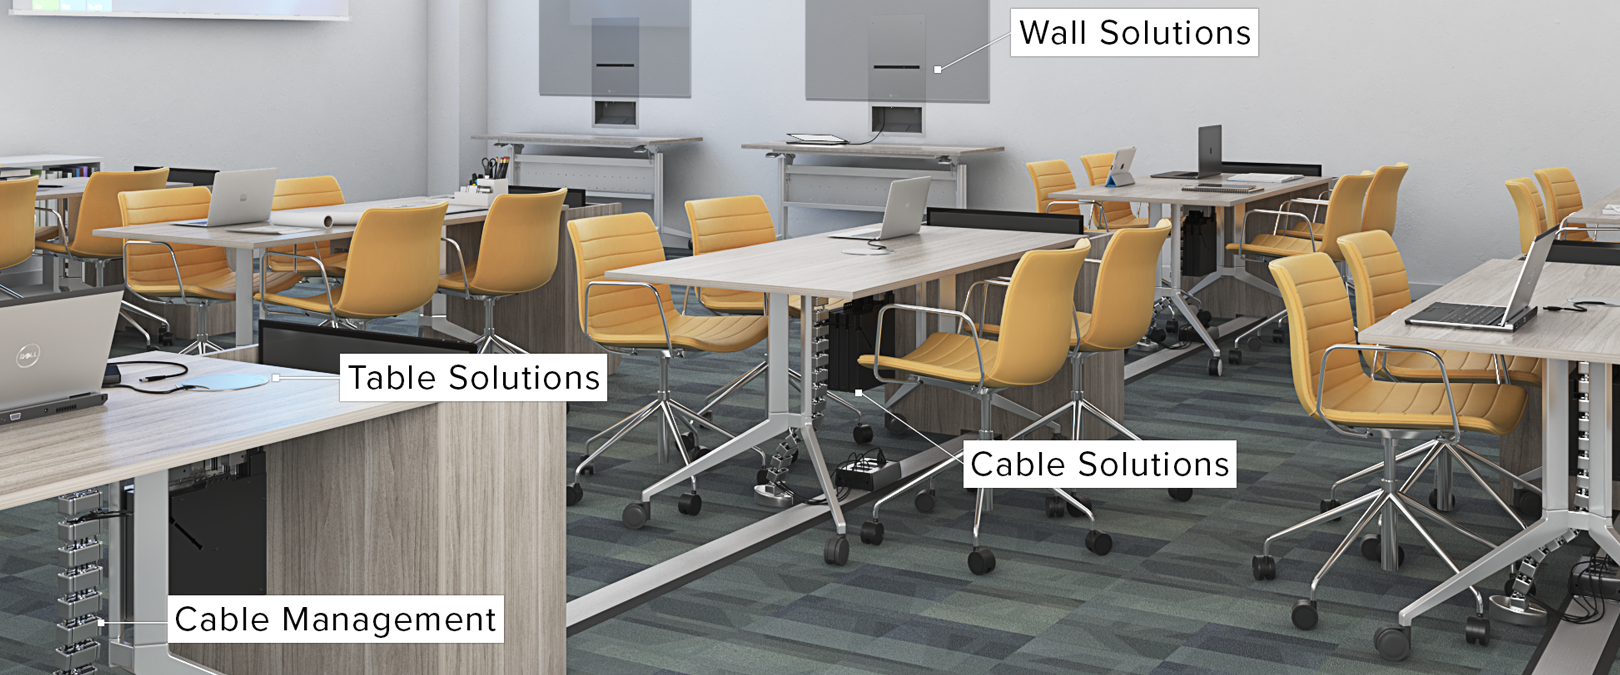 Classroom-Solutions-1620x675 How Can Technology Help Engage The Commuter Student? - FSR, Inc. - AV Connectivity Solutions